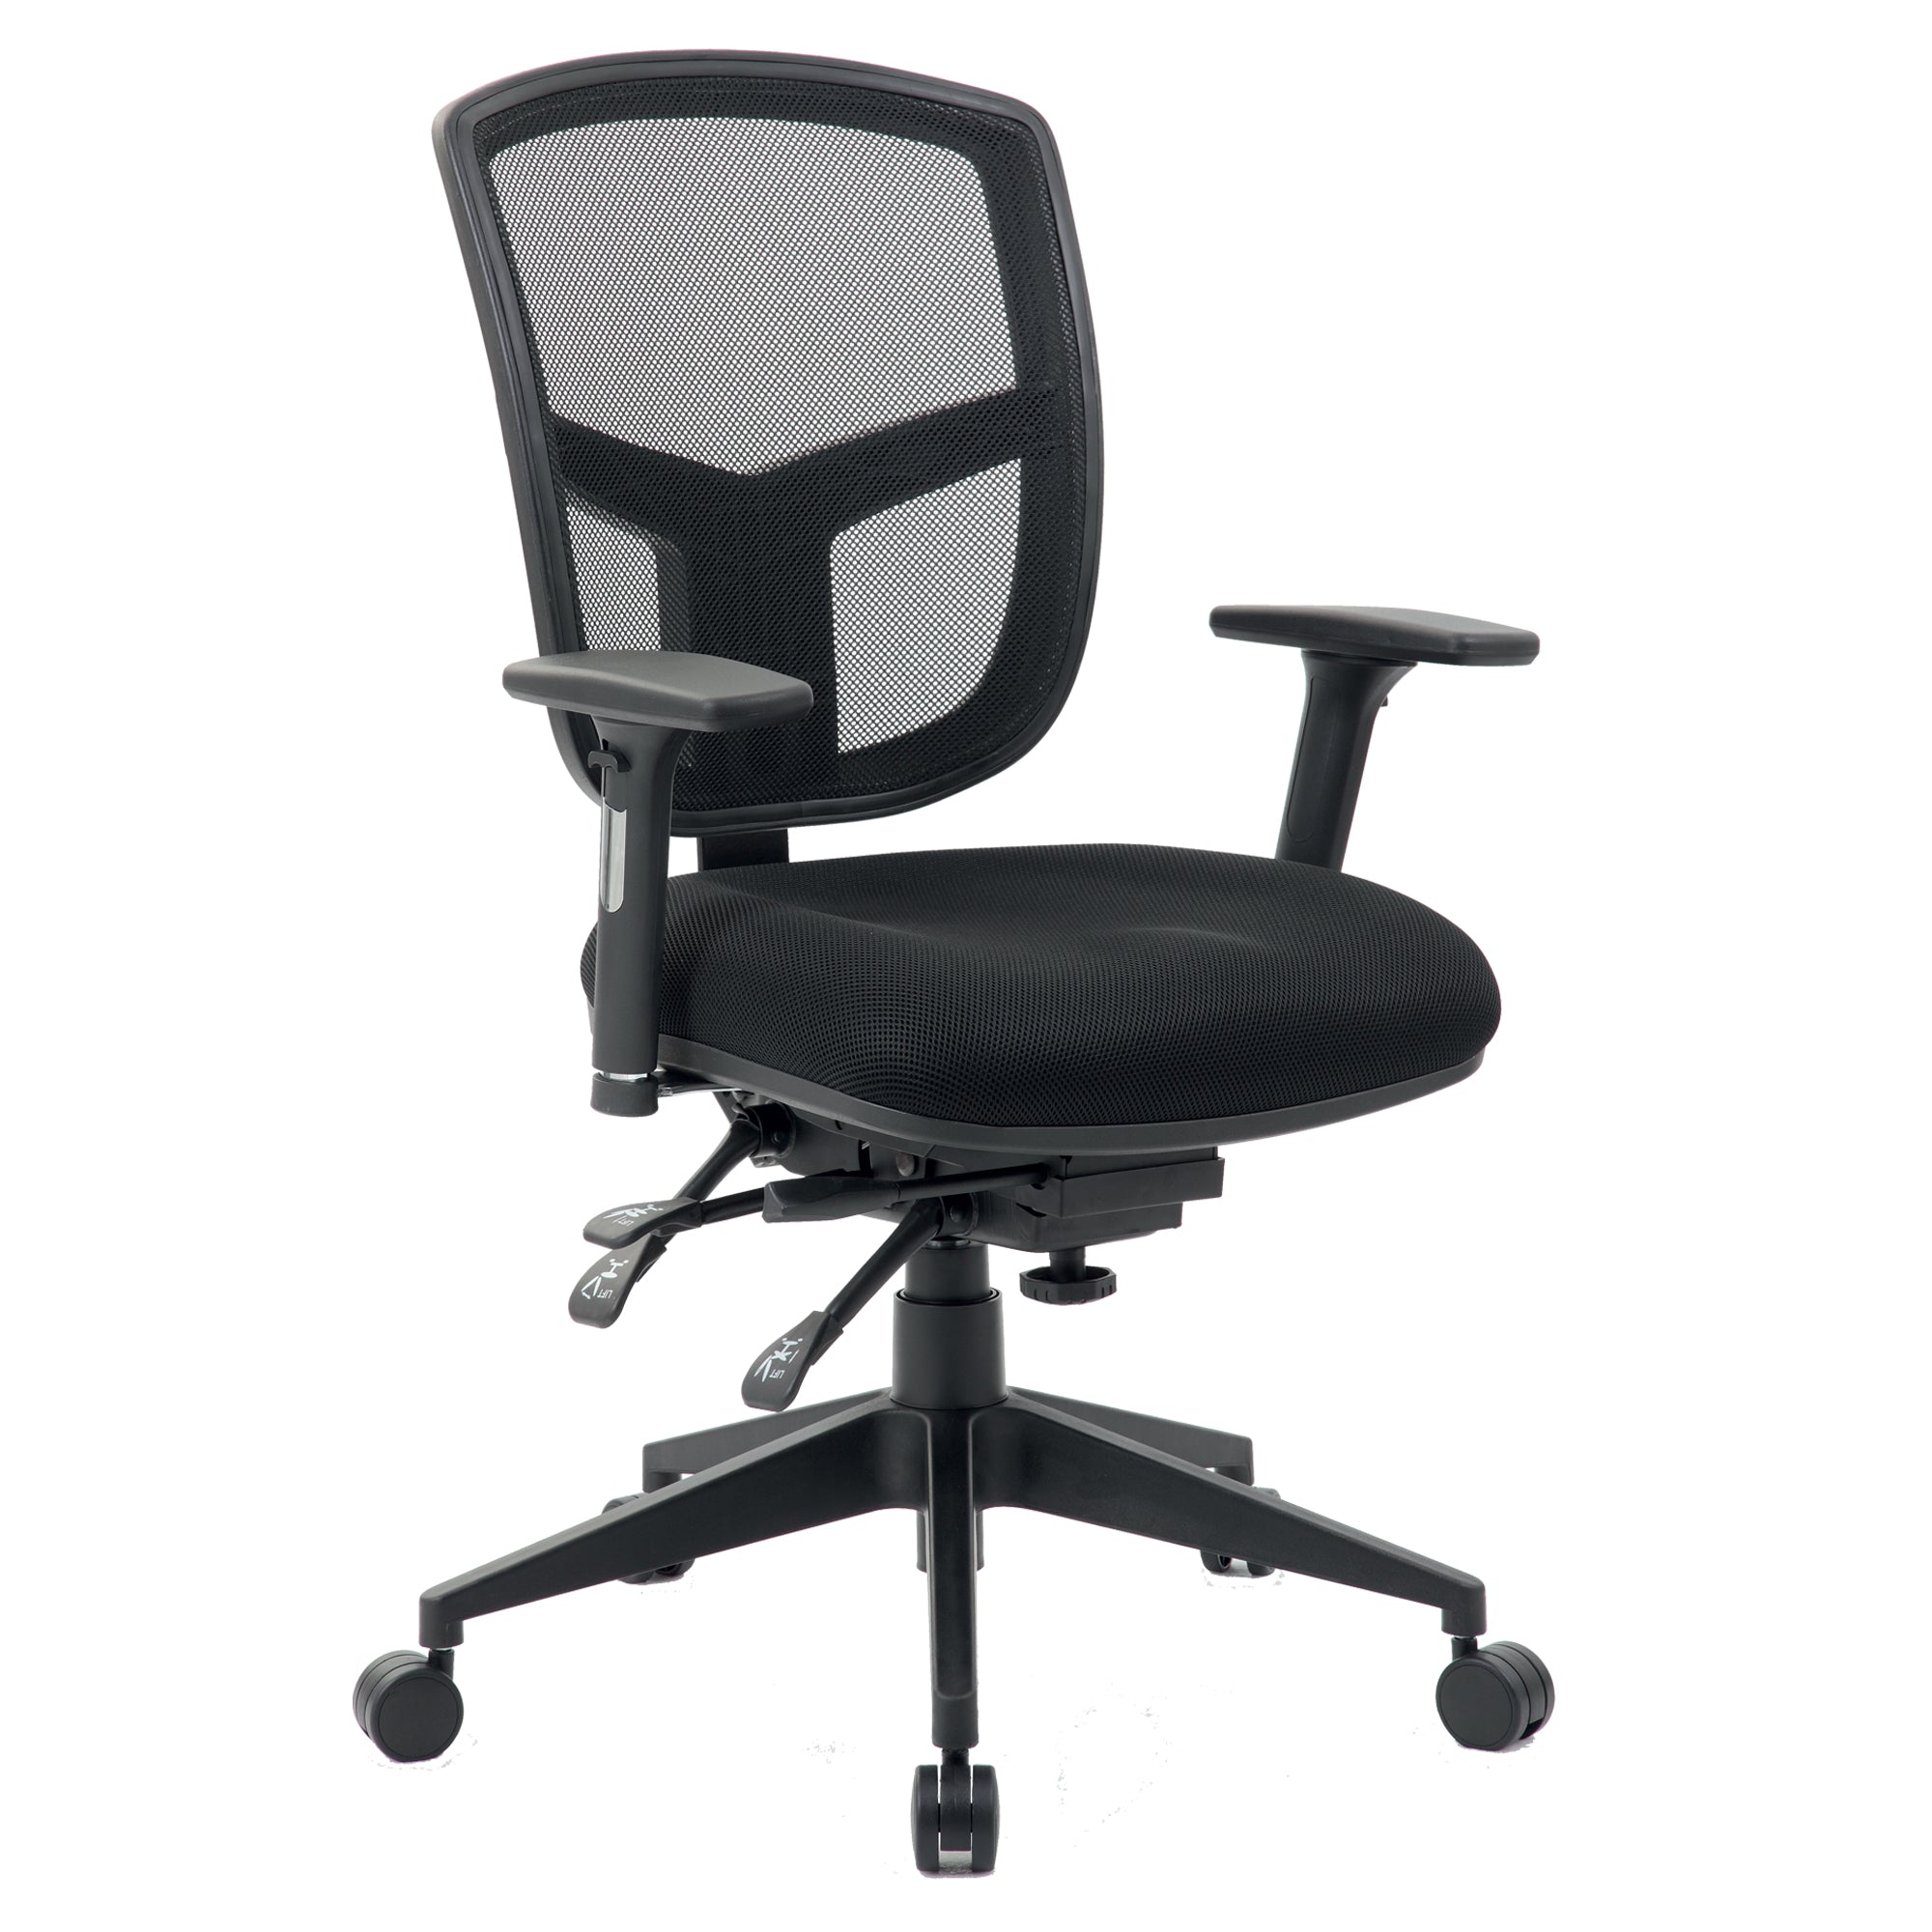 Miami Mesh Back Office Task Chair YS13